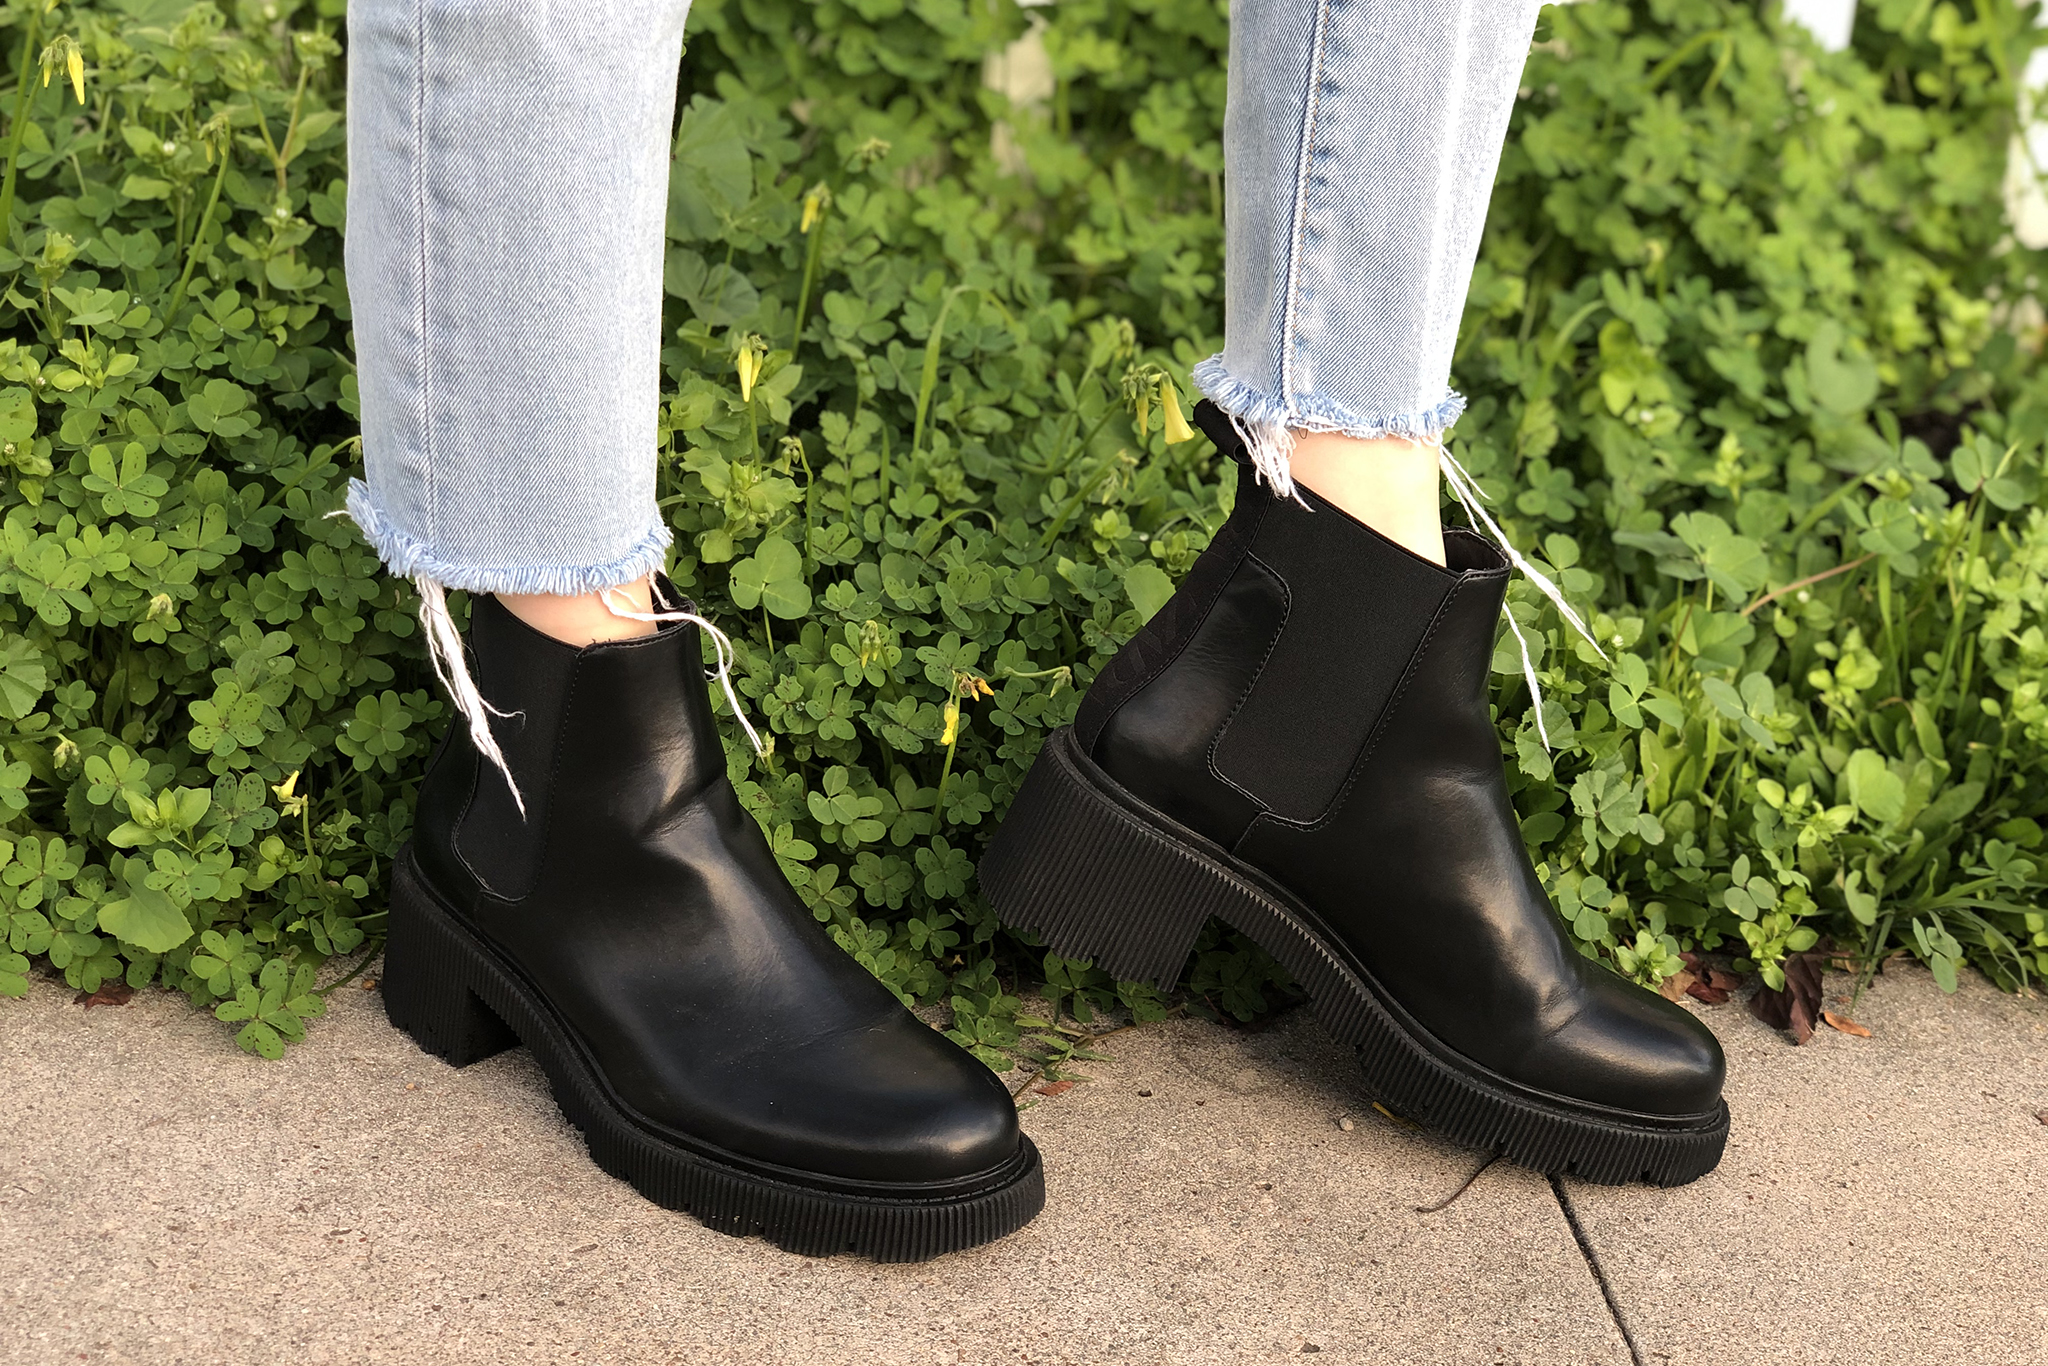 Boots and booties from Zara and Shiekh Shoes | San Diego Reader